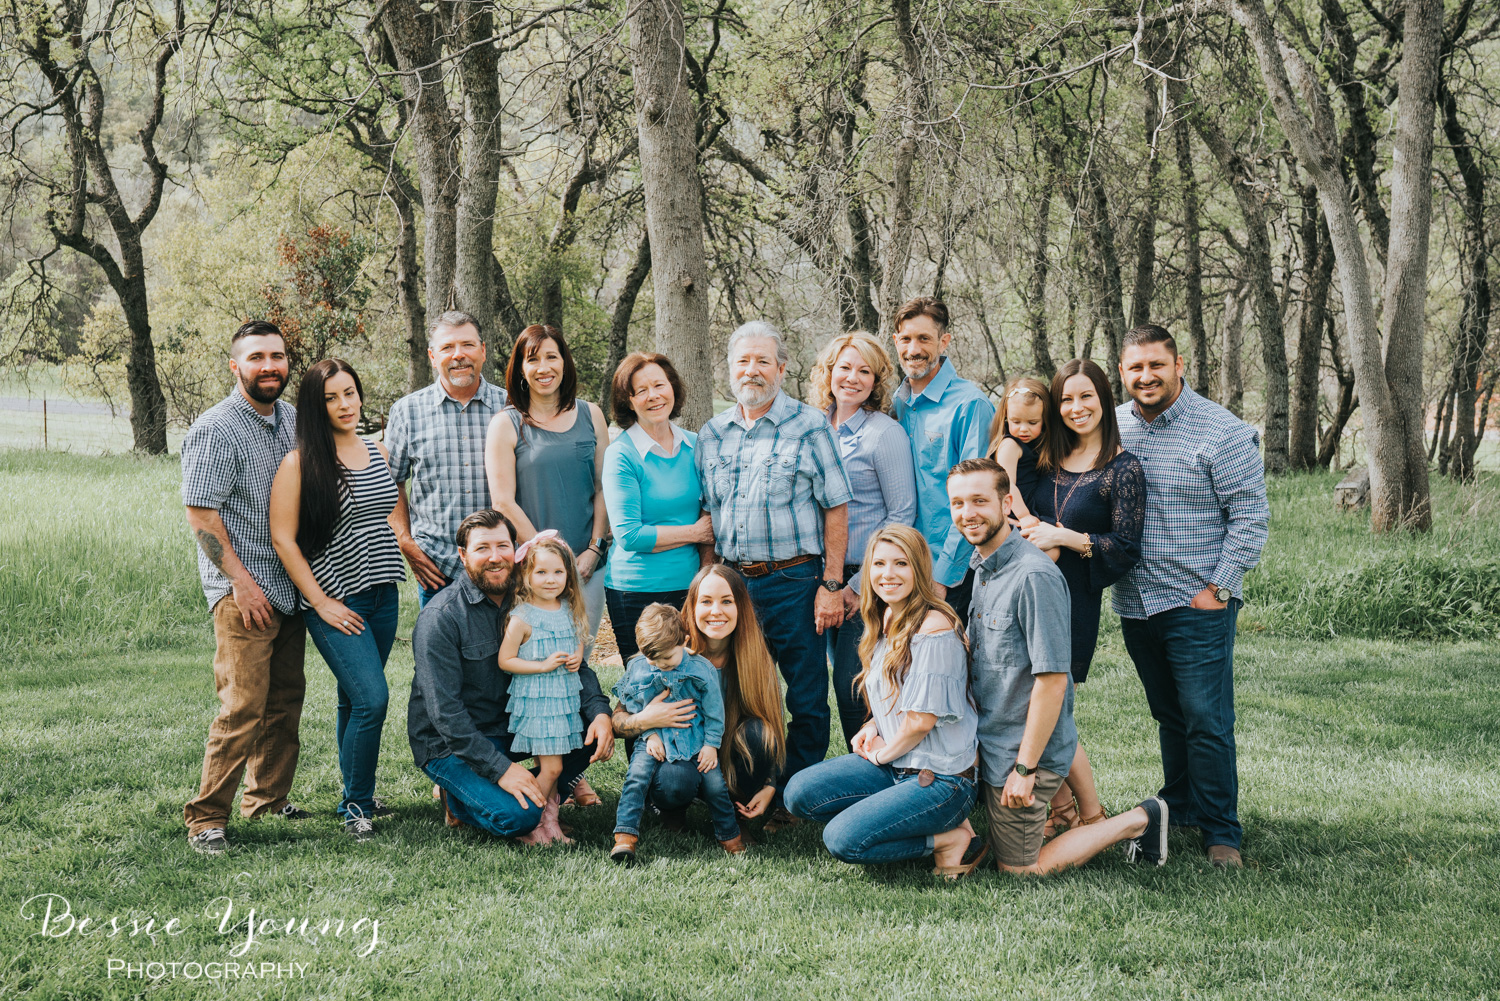 How To Take Large Family Portraits  Copperopolis Family Portraits by Bessie Young Photography 3.jpg